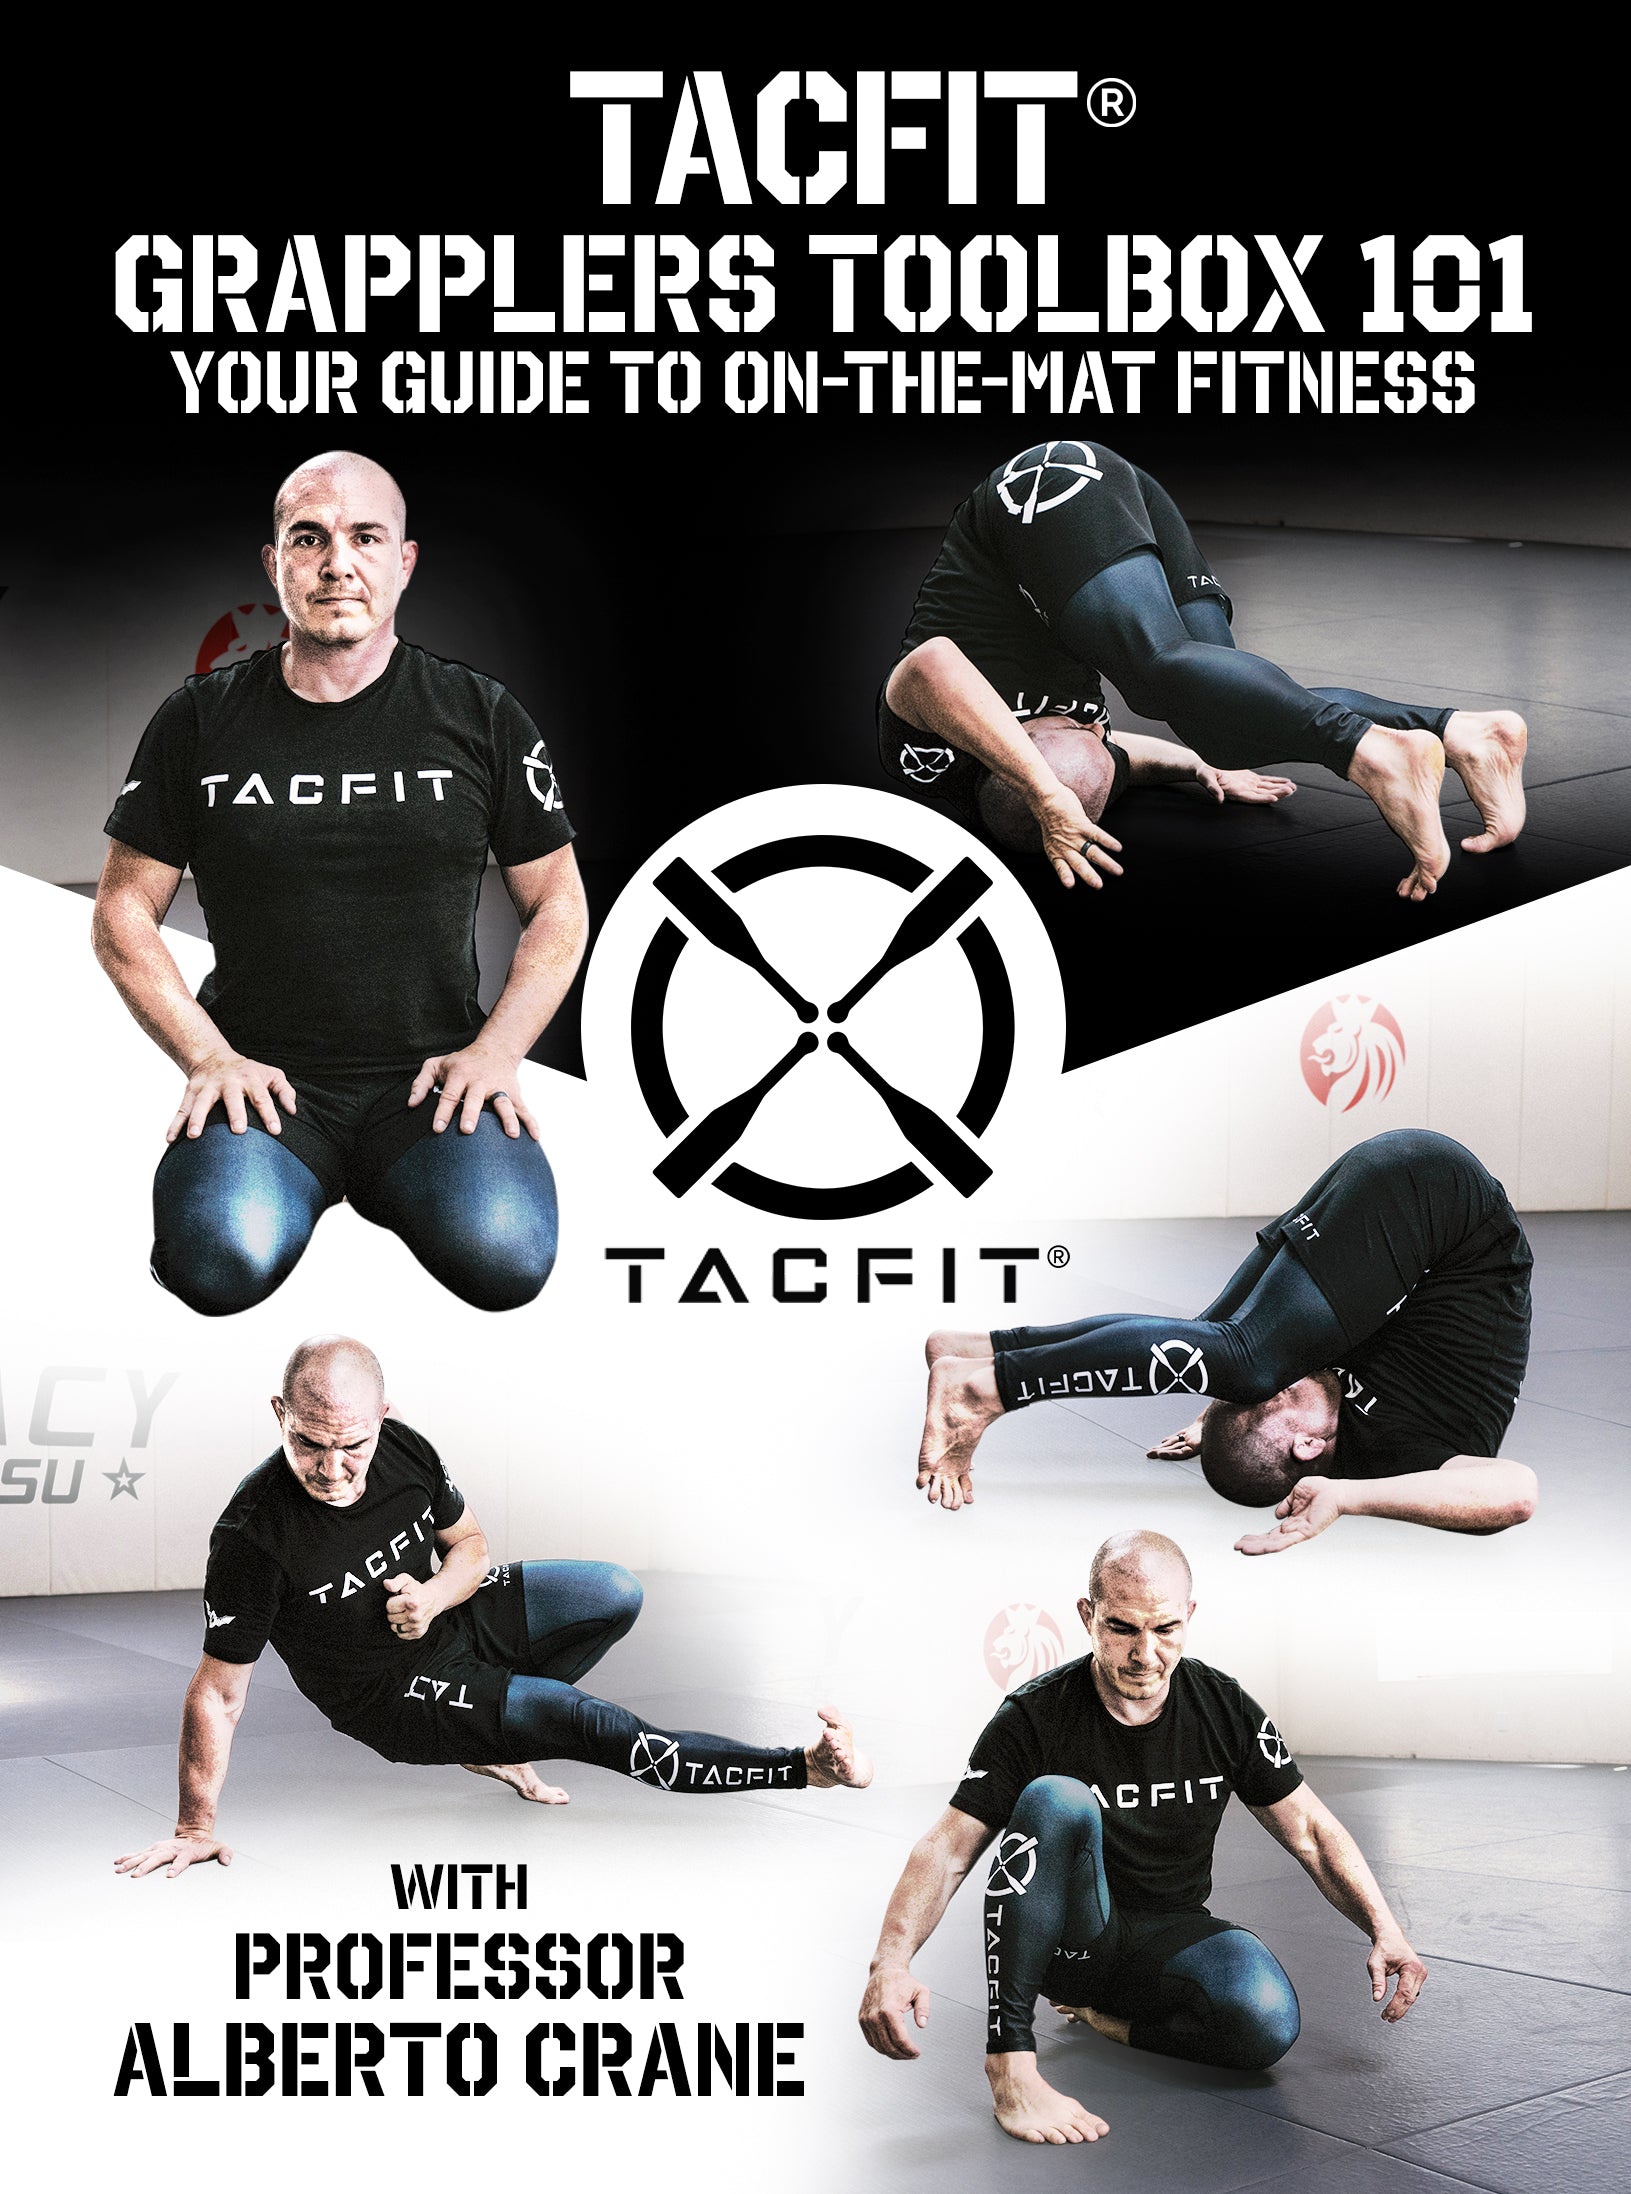 The Grapplers Guide – Dedicated 100% To Your Grappling Improvement